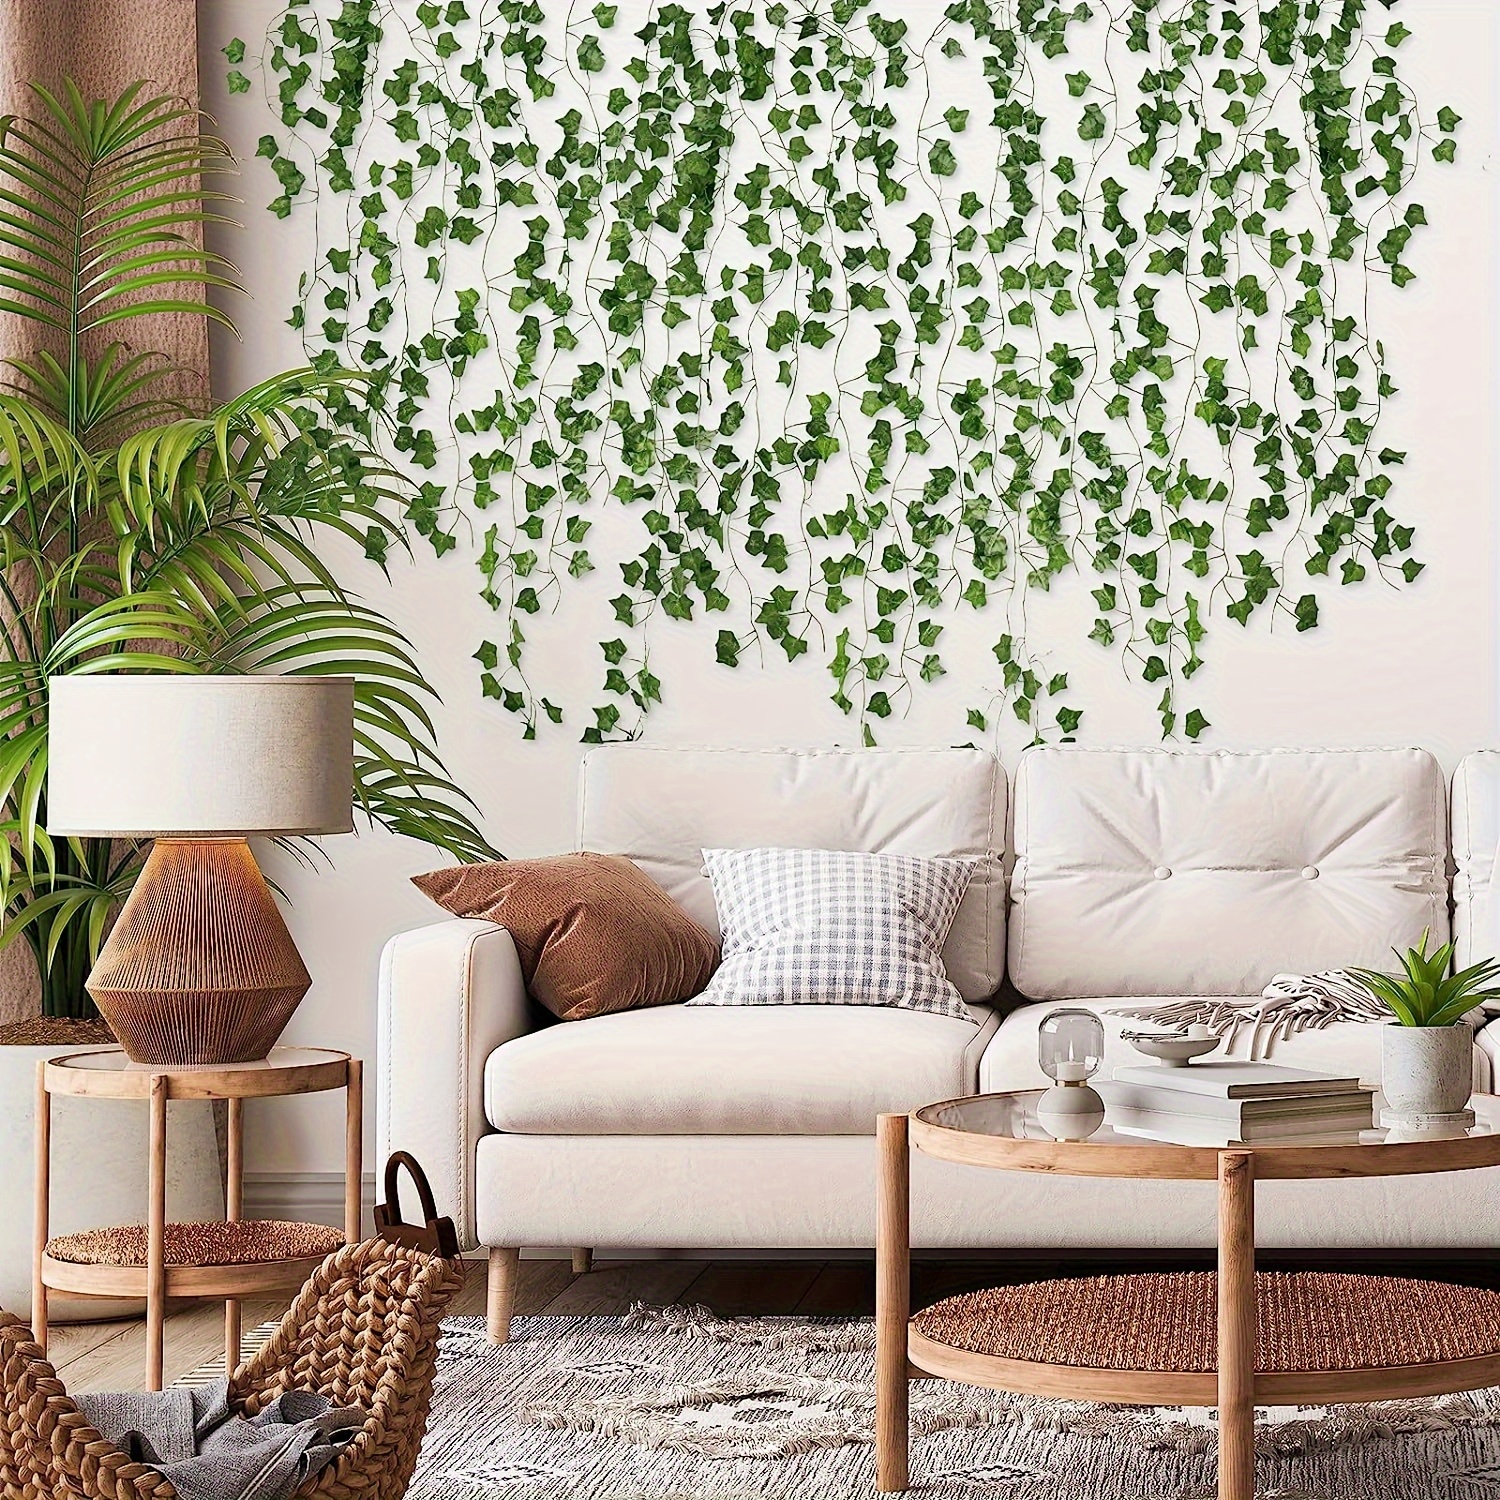 12 Pack Artificial Ivy Garland Fake Vines For Room Decor Fake Plants Ivy  Greenery Leaves U